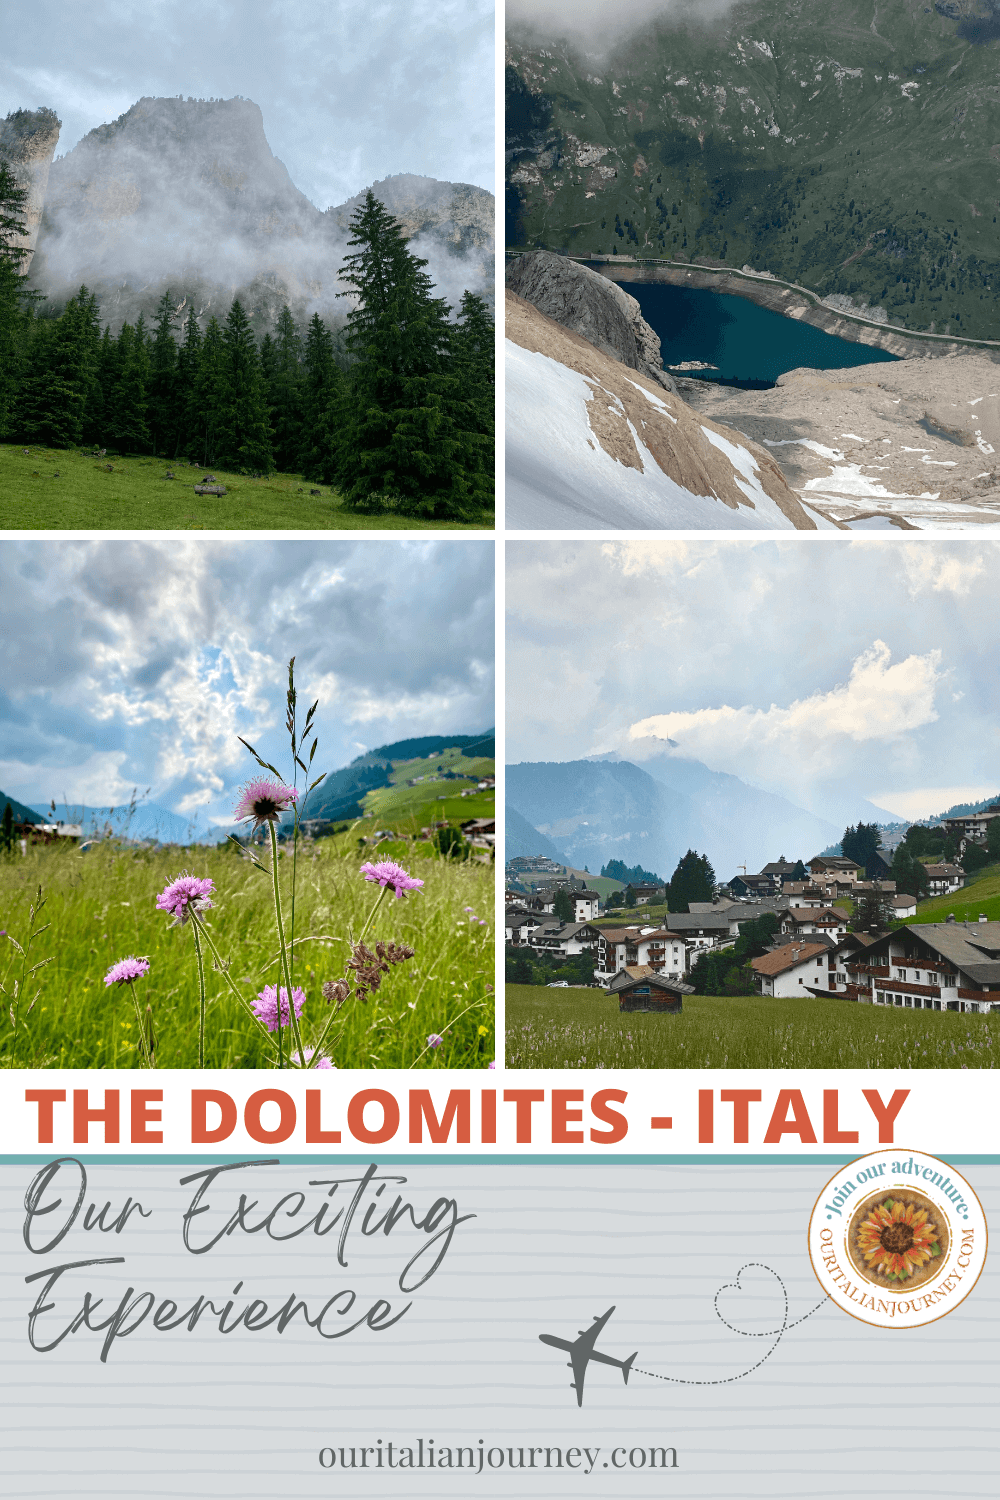 The Dolomites in Italy, our exciting outdoor adventure experience, ouritalianjourney.com